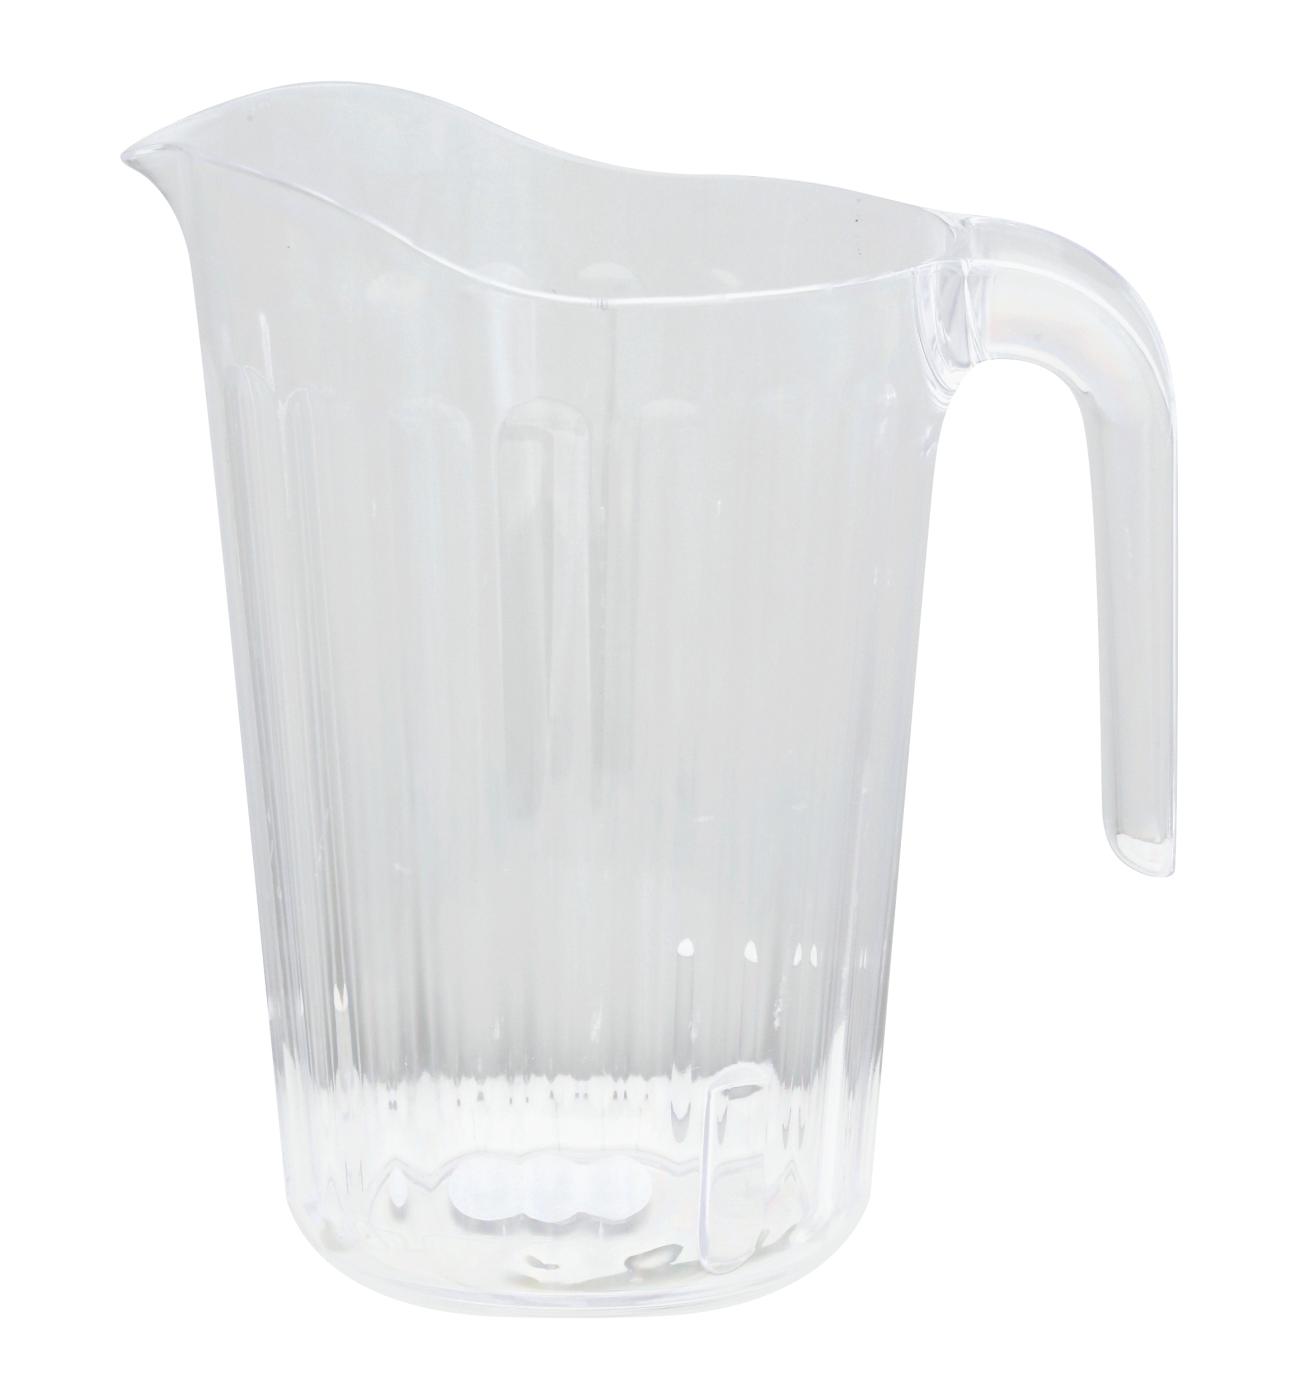 Arrow Plastic Stacking Pitcher, Colors May Vary; image 2 of 3